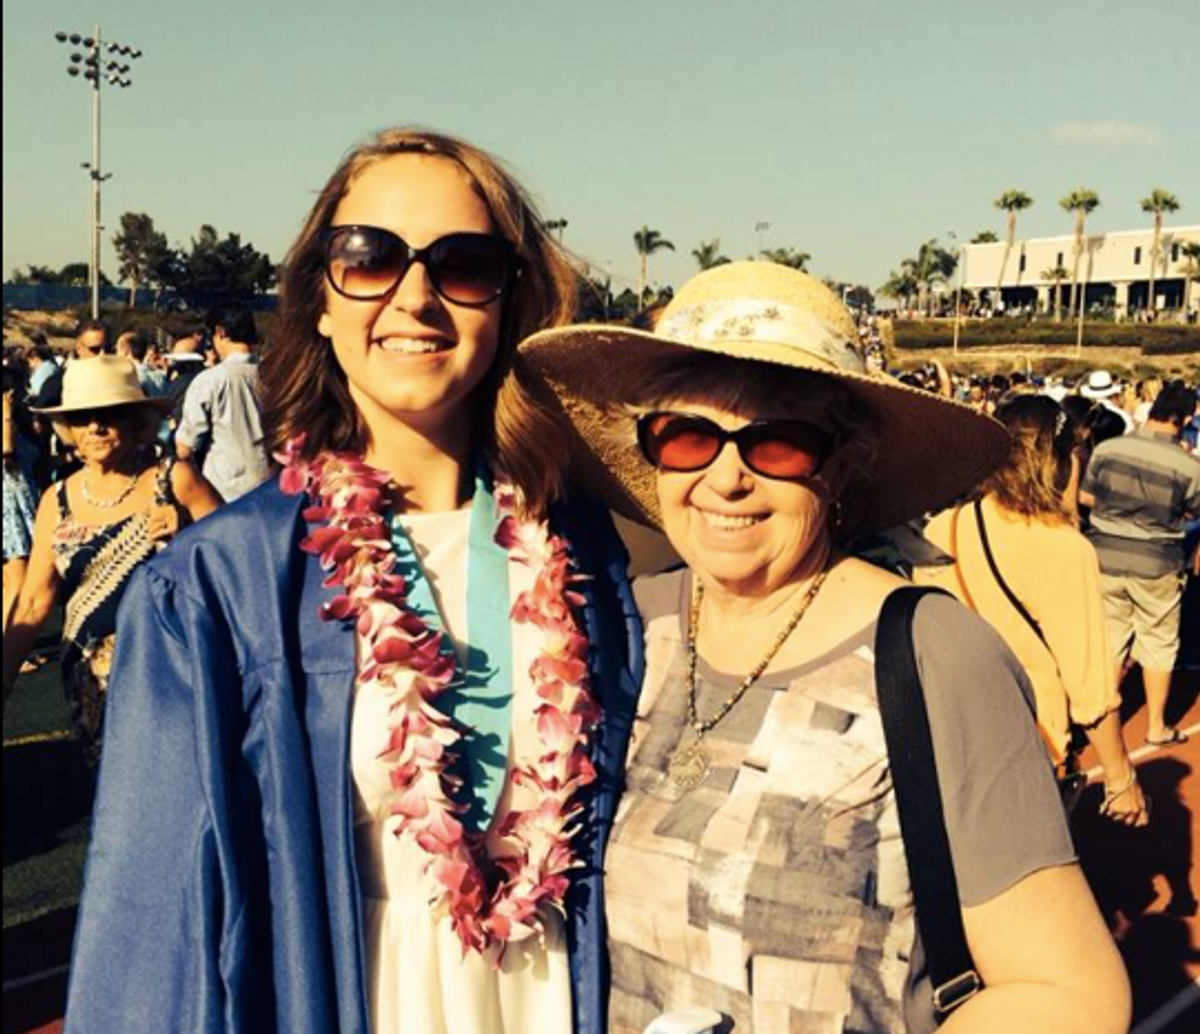 I Took My Grandmother’s Relationship Advice For A Week, And This Is What Happened